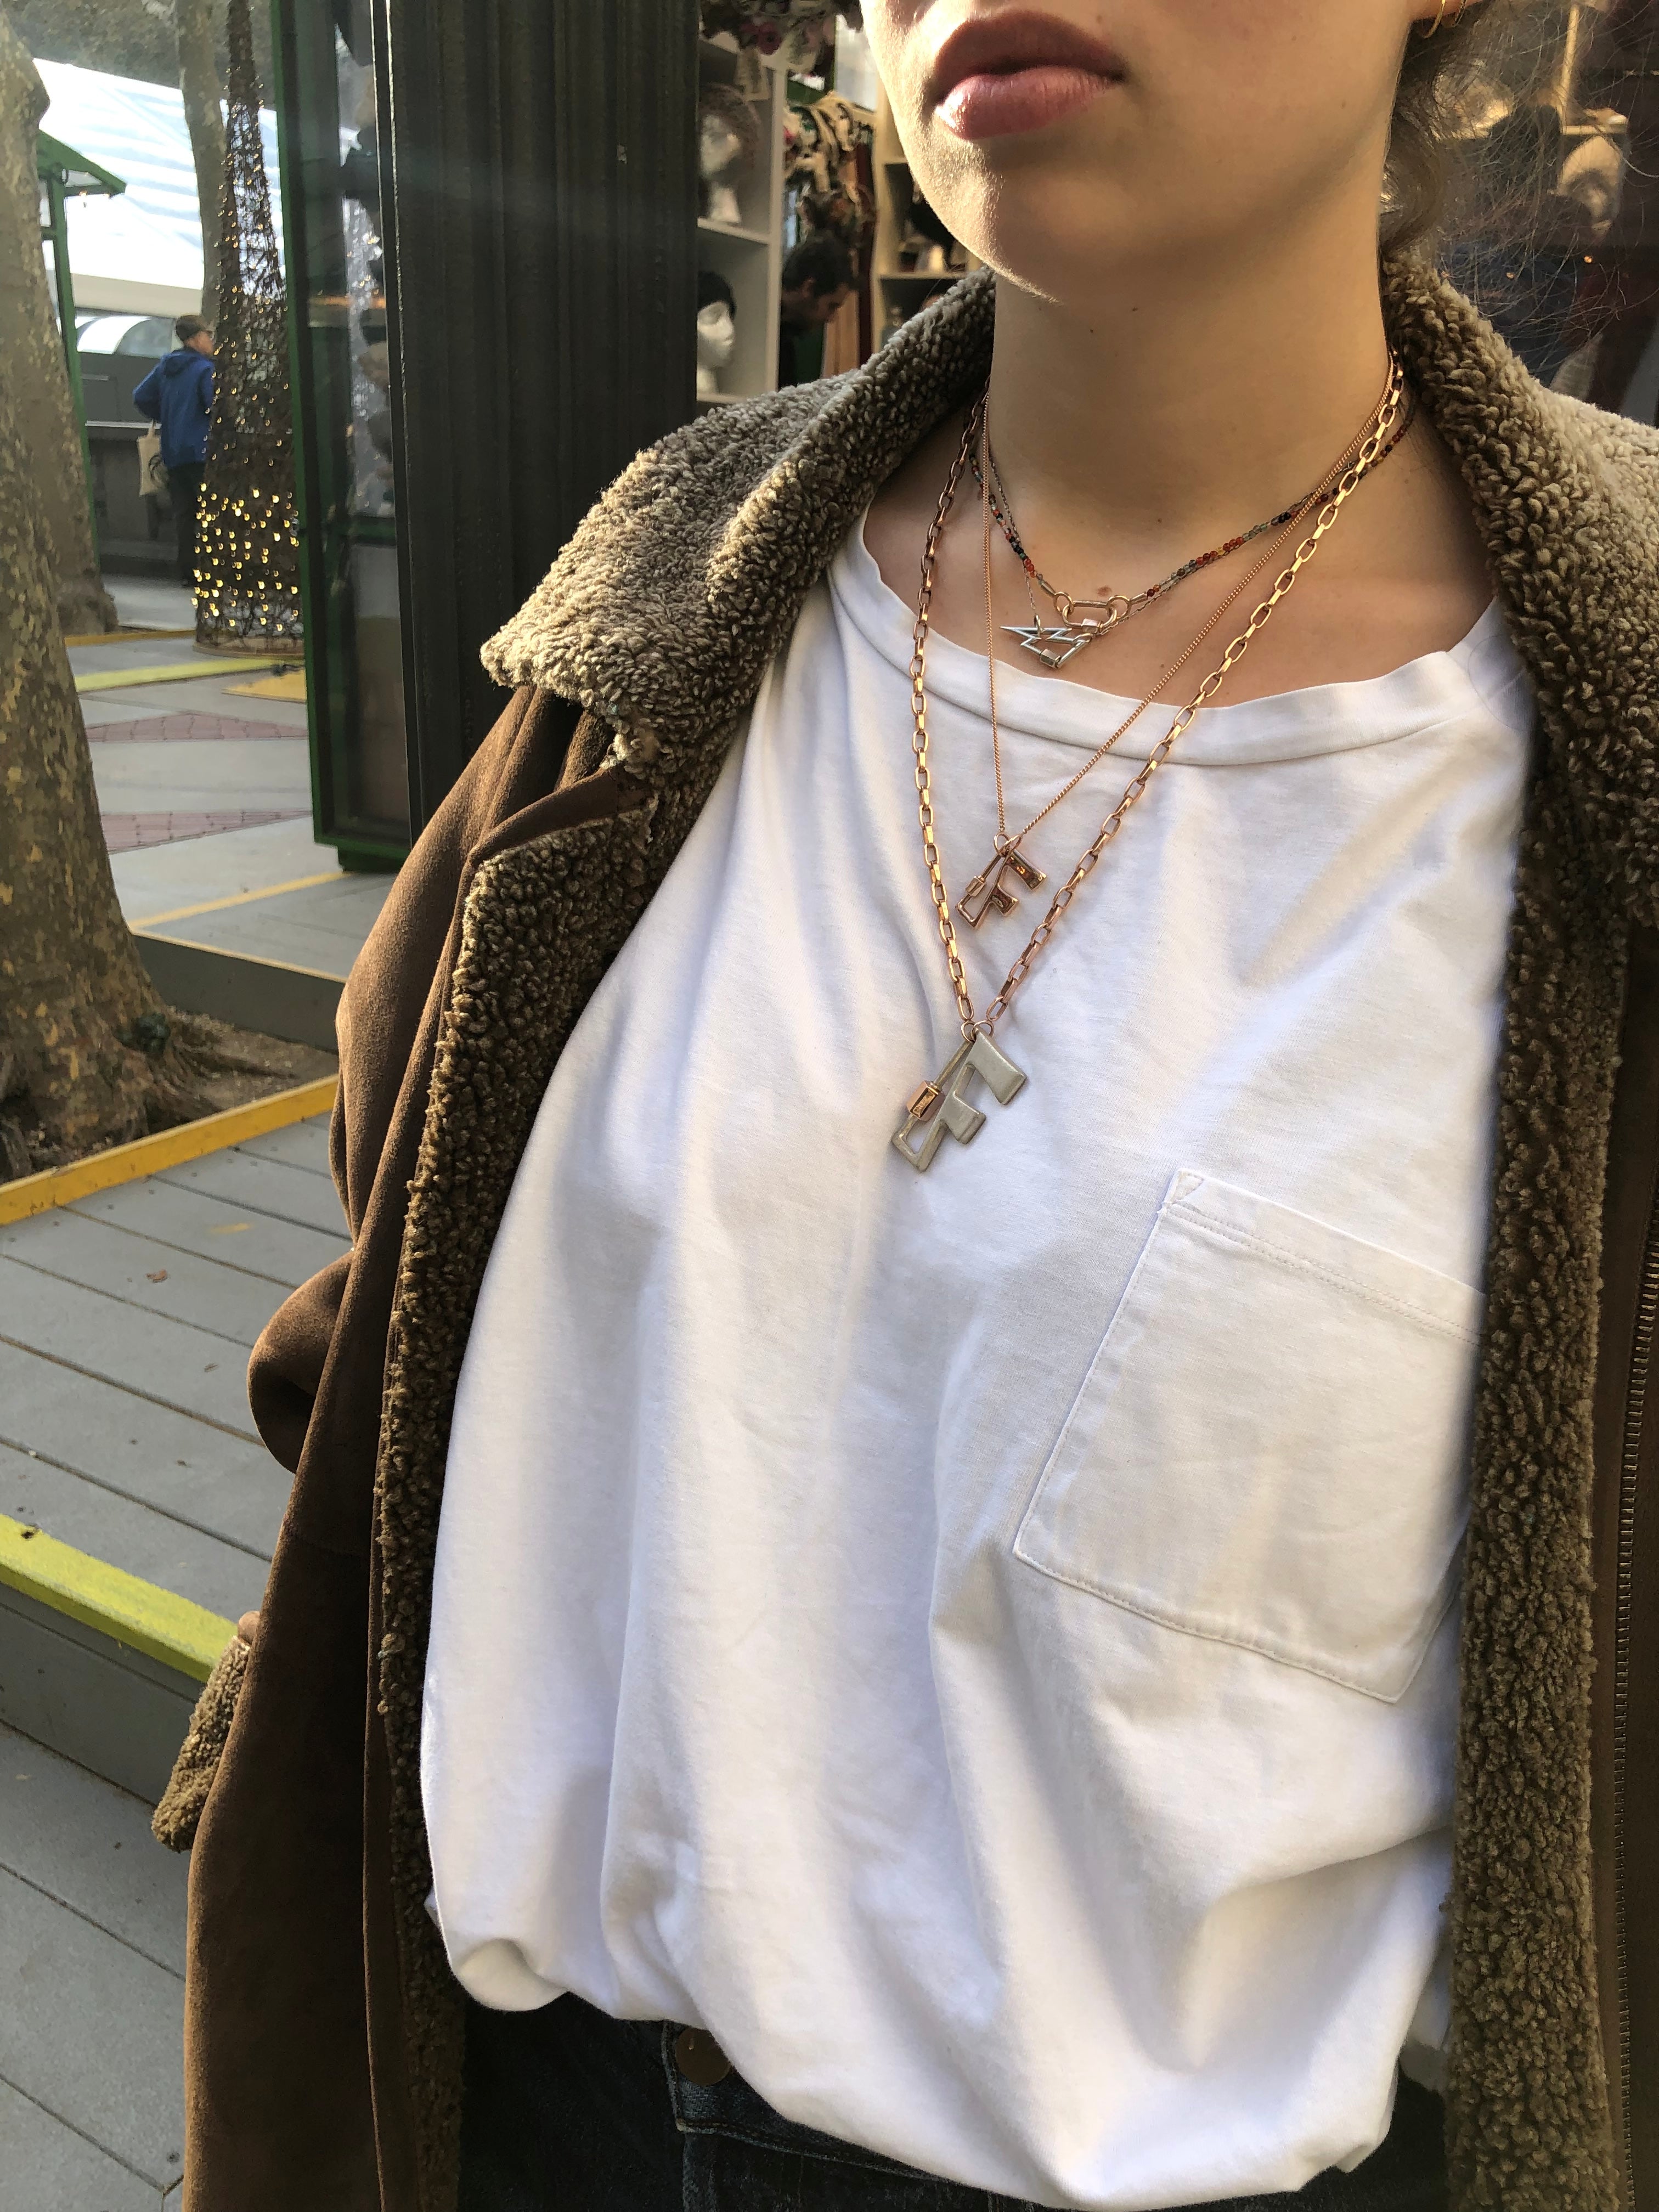 Woman wearing necklace with F lock